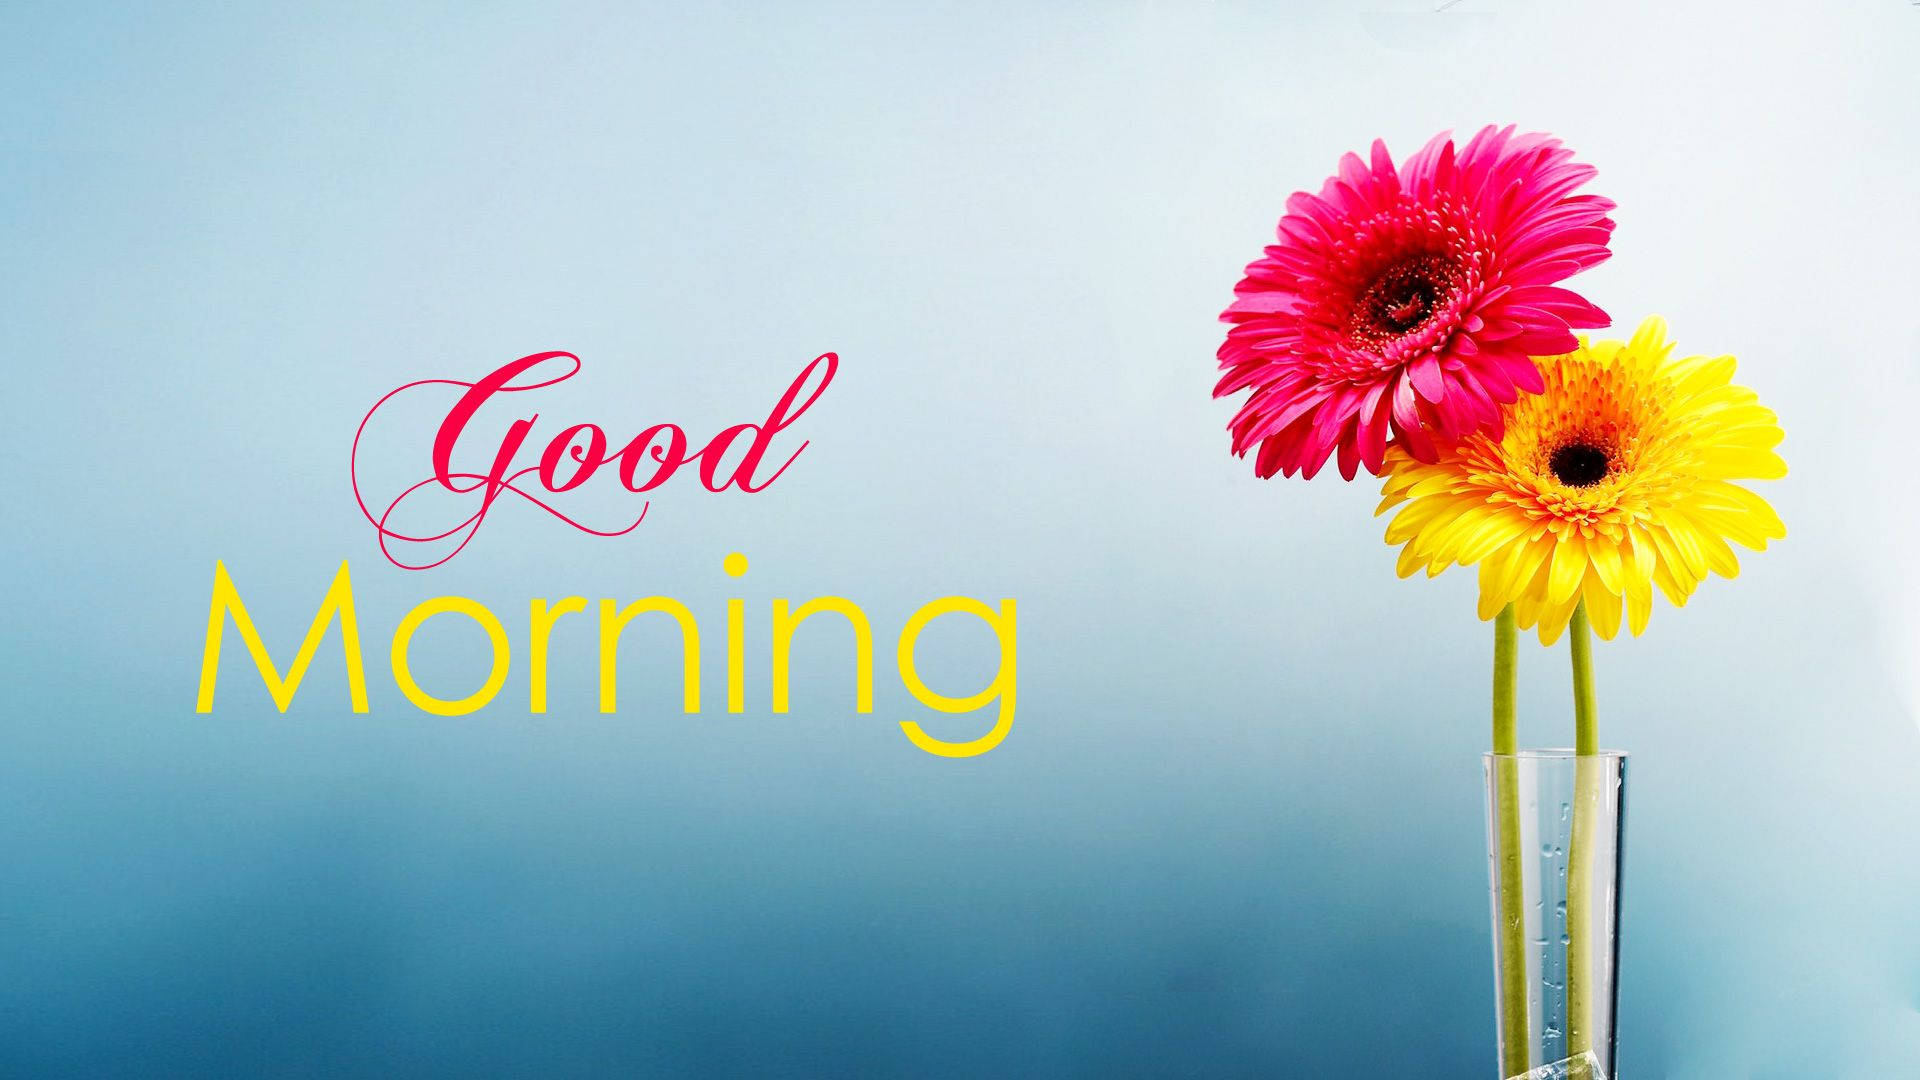 Download Good Morning Wallpaper With Flowers, Full Hd 1920x1080 Gm Image  Wallpaper 